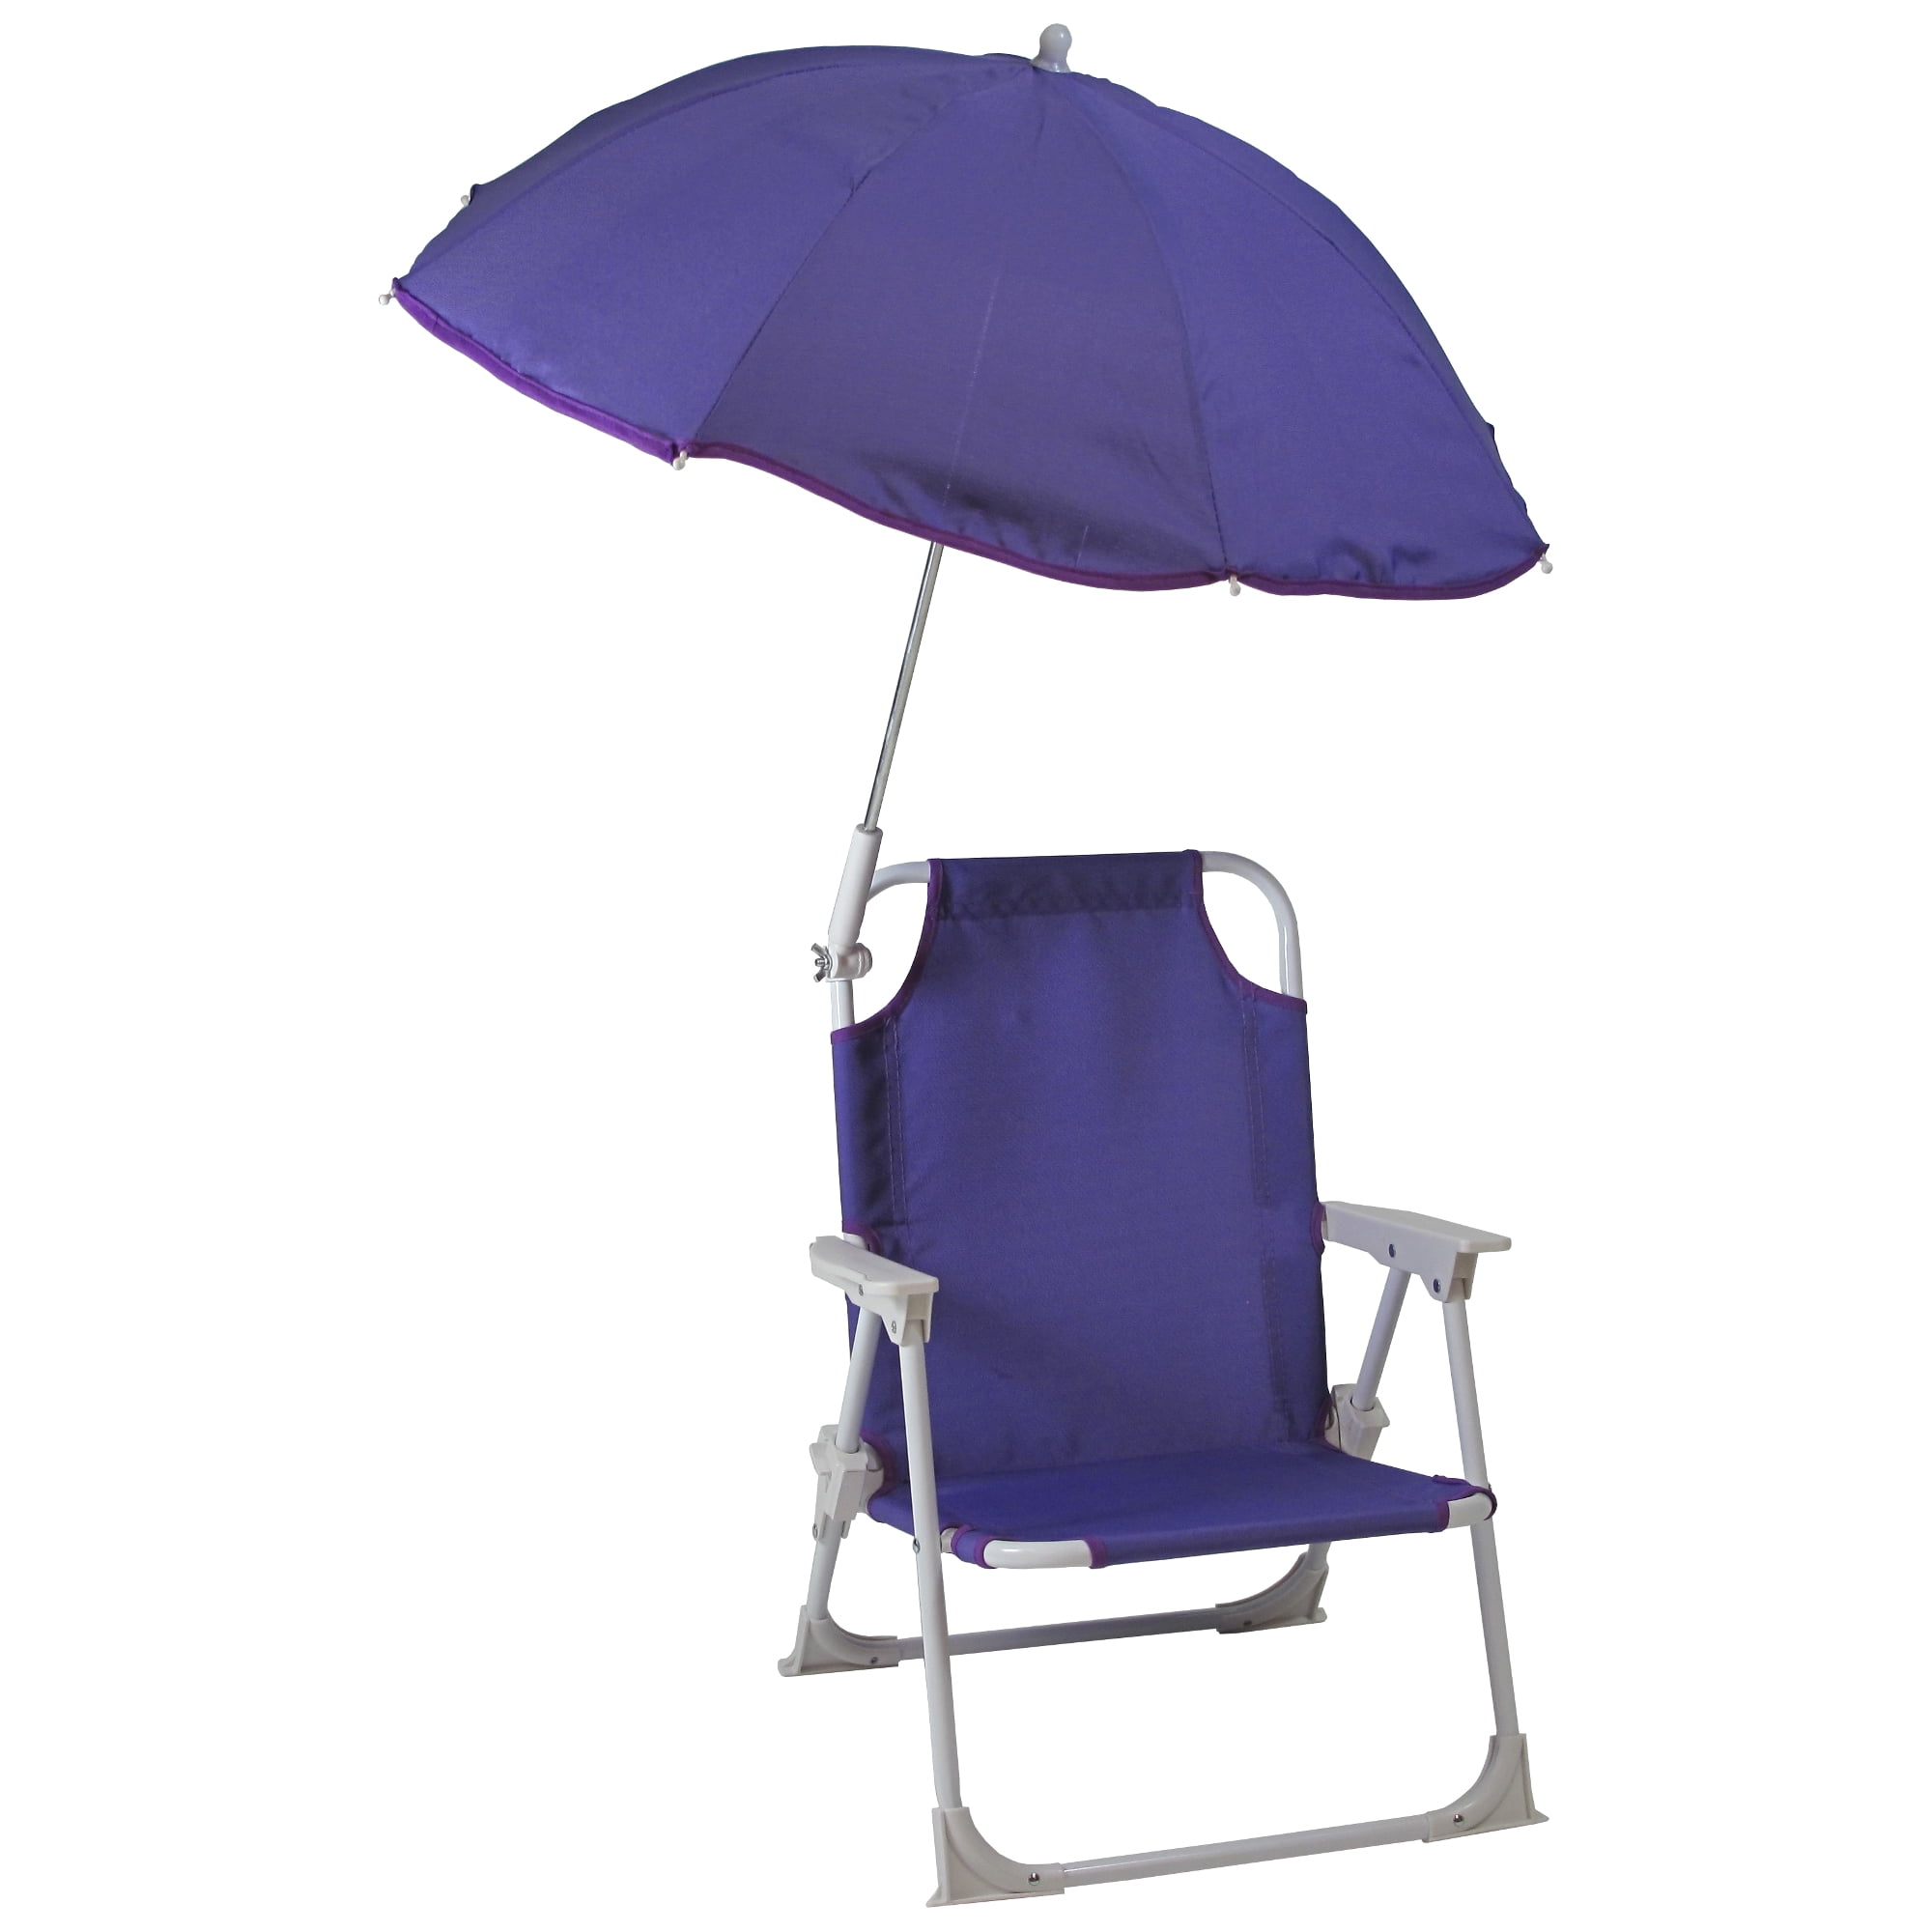 Creatice Disney Beach Chair With Umbrella for Large Space